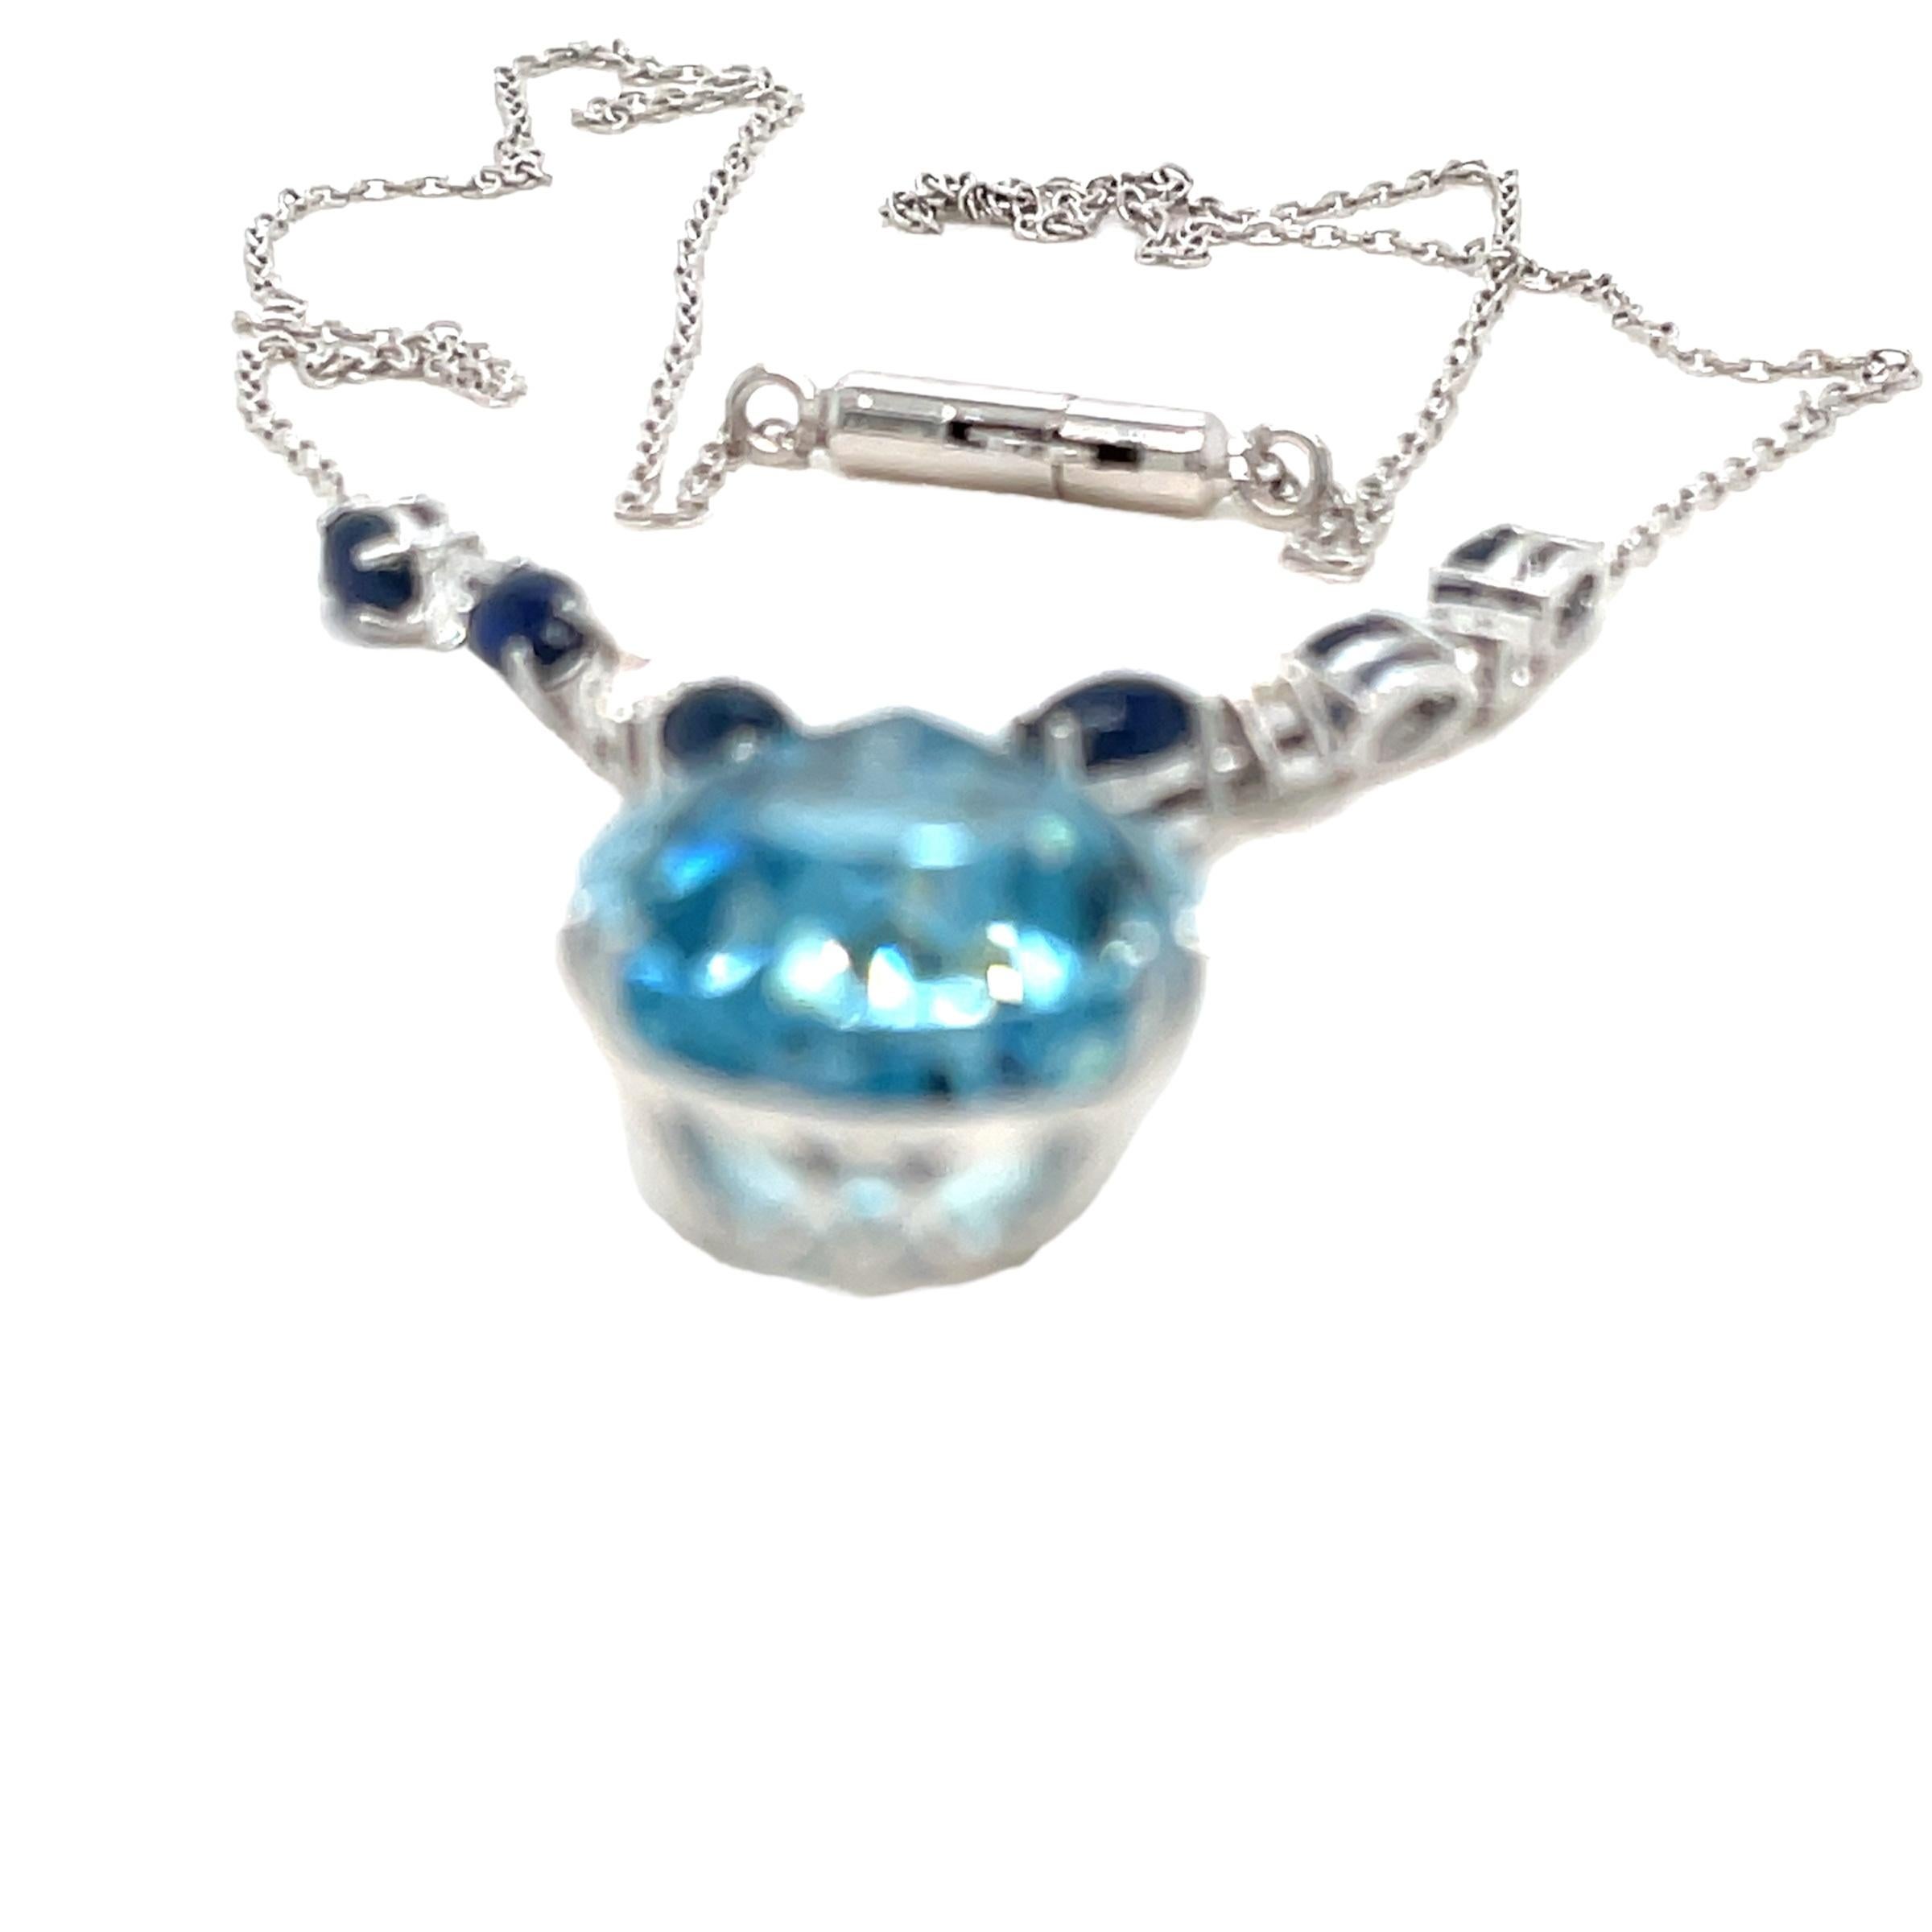 An impressive vintage 1960's 18k white gold necklace set with one large exquisite pear shape Natural Aquamarine, for a total weight of 11,90 Carats, surrounded by one large round cut Diamond and 4 smallest in a white gold setting - total weight 0,50